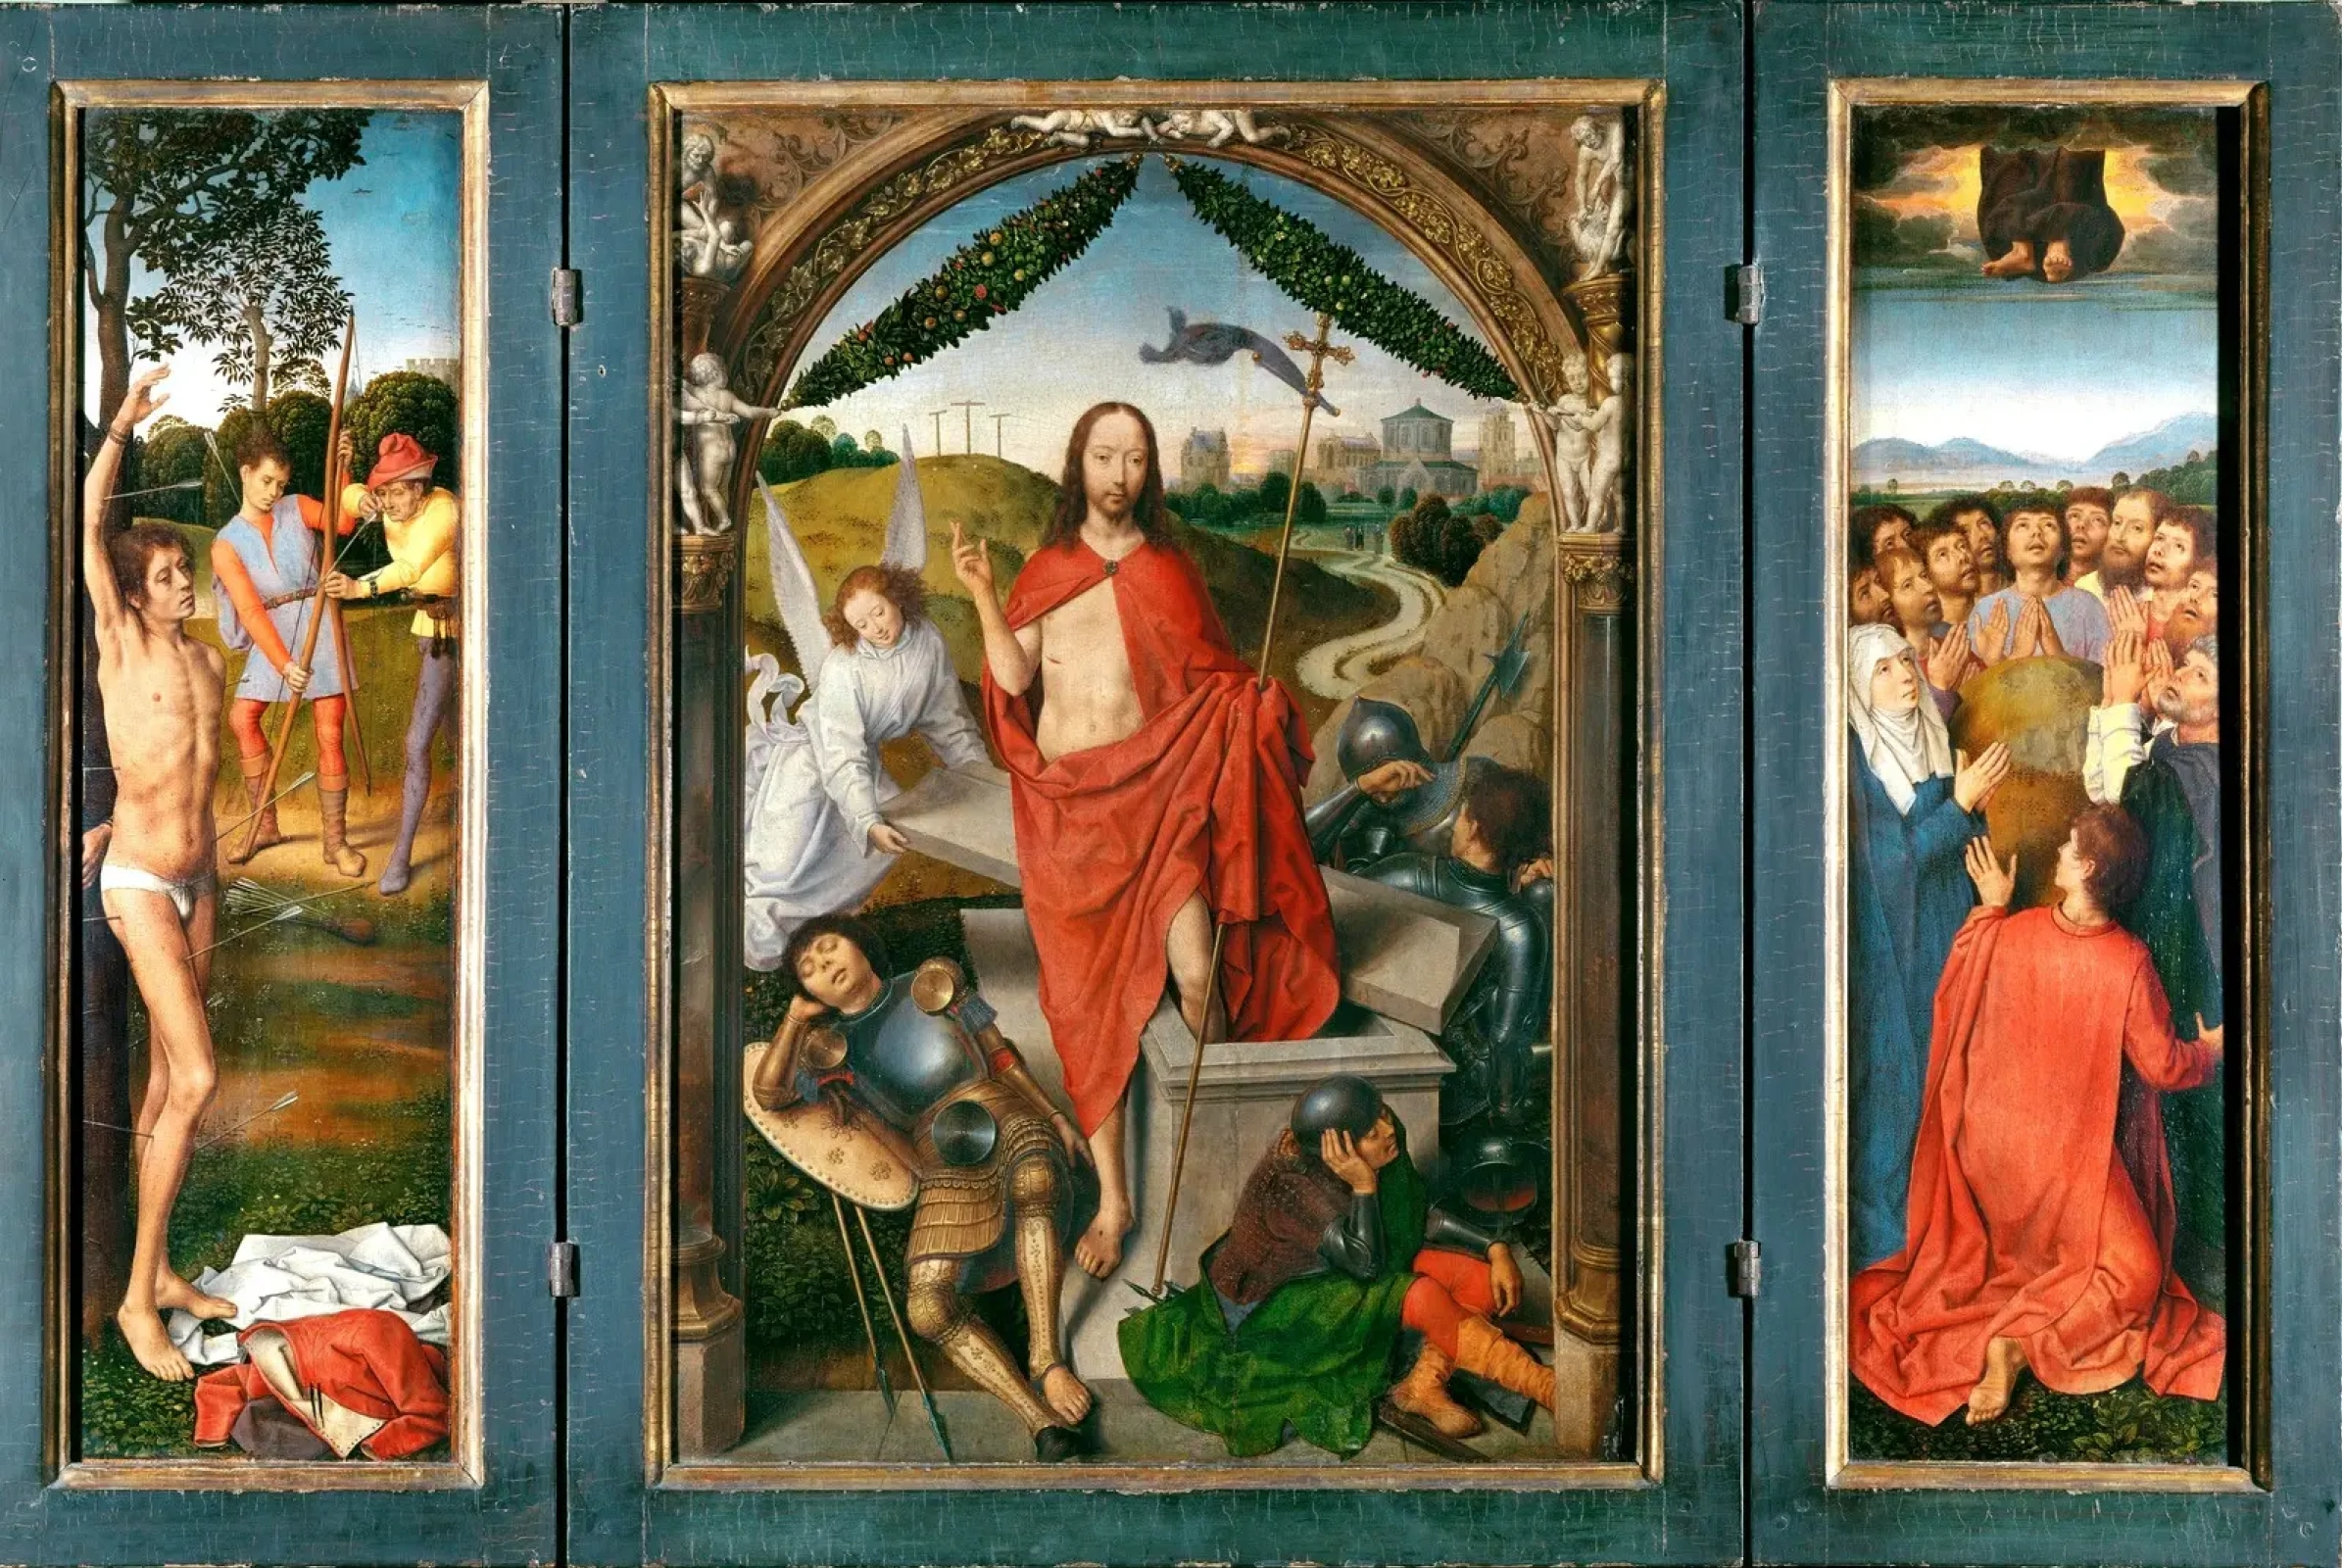 Hans Memling. Triptych of the Resurrection of Christ